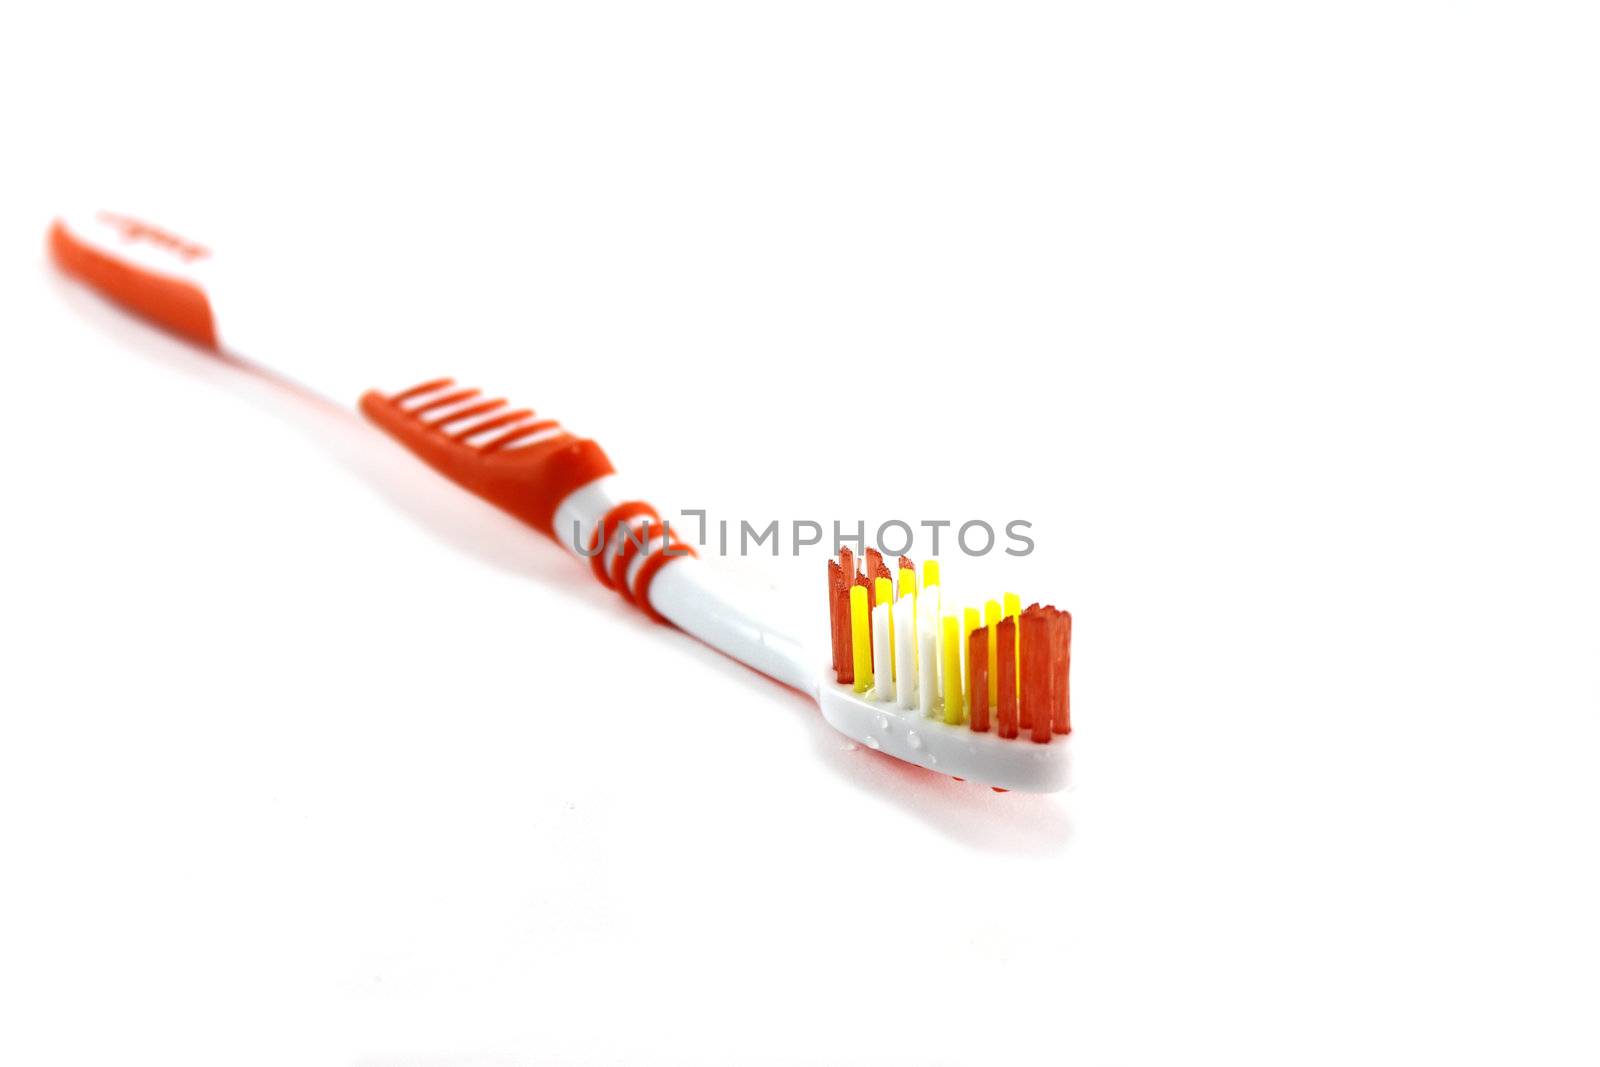 Close up of a orange toothbrush by fotosender